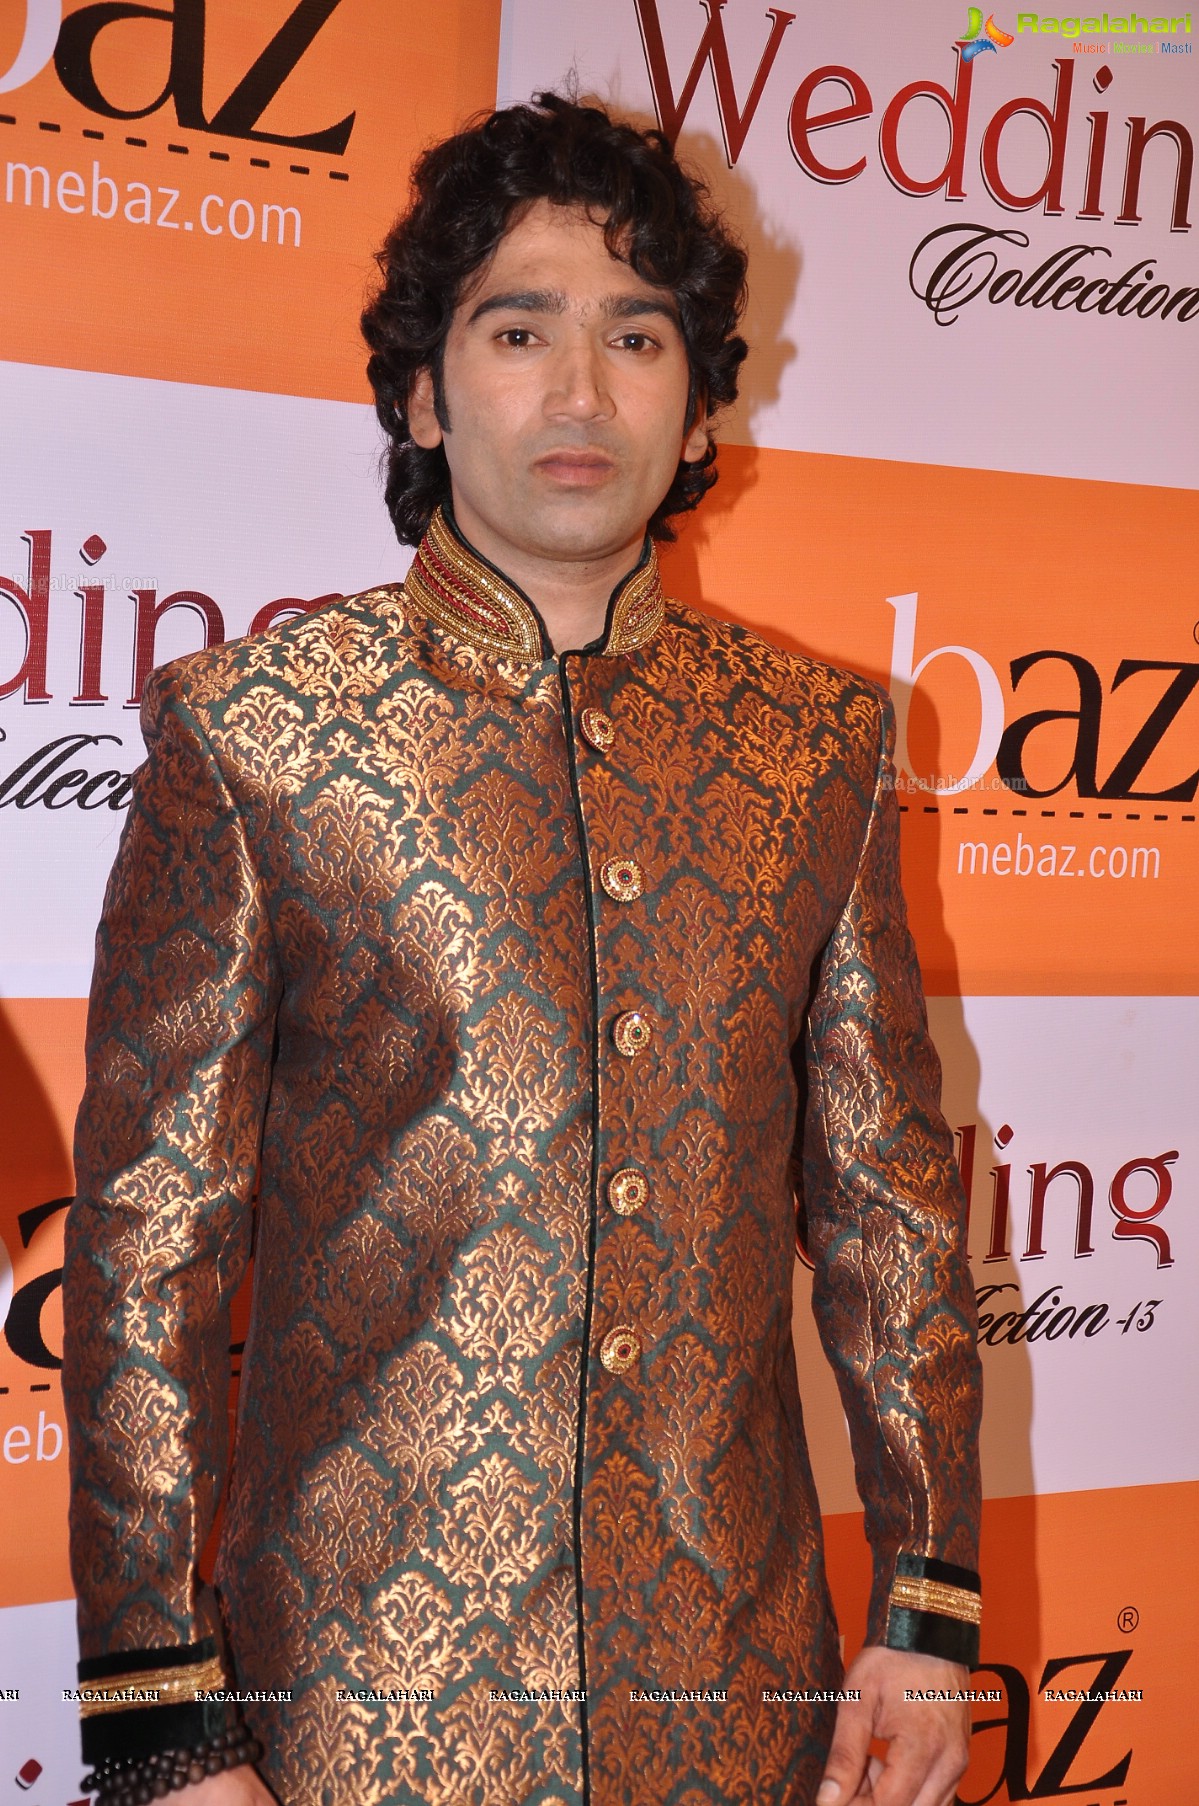 Mebaz Summer Wedding Collection 2013 Launch